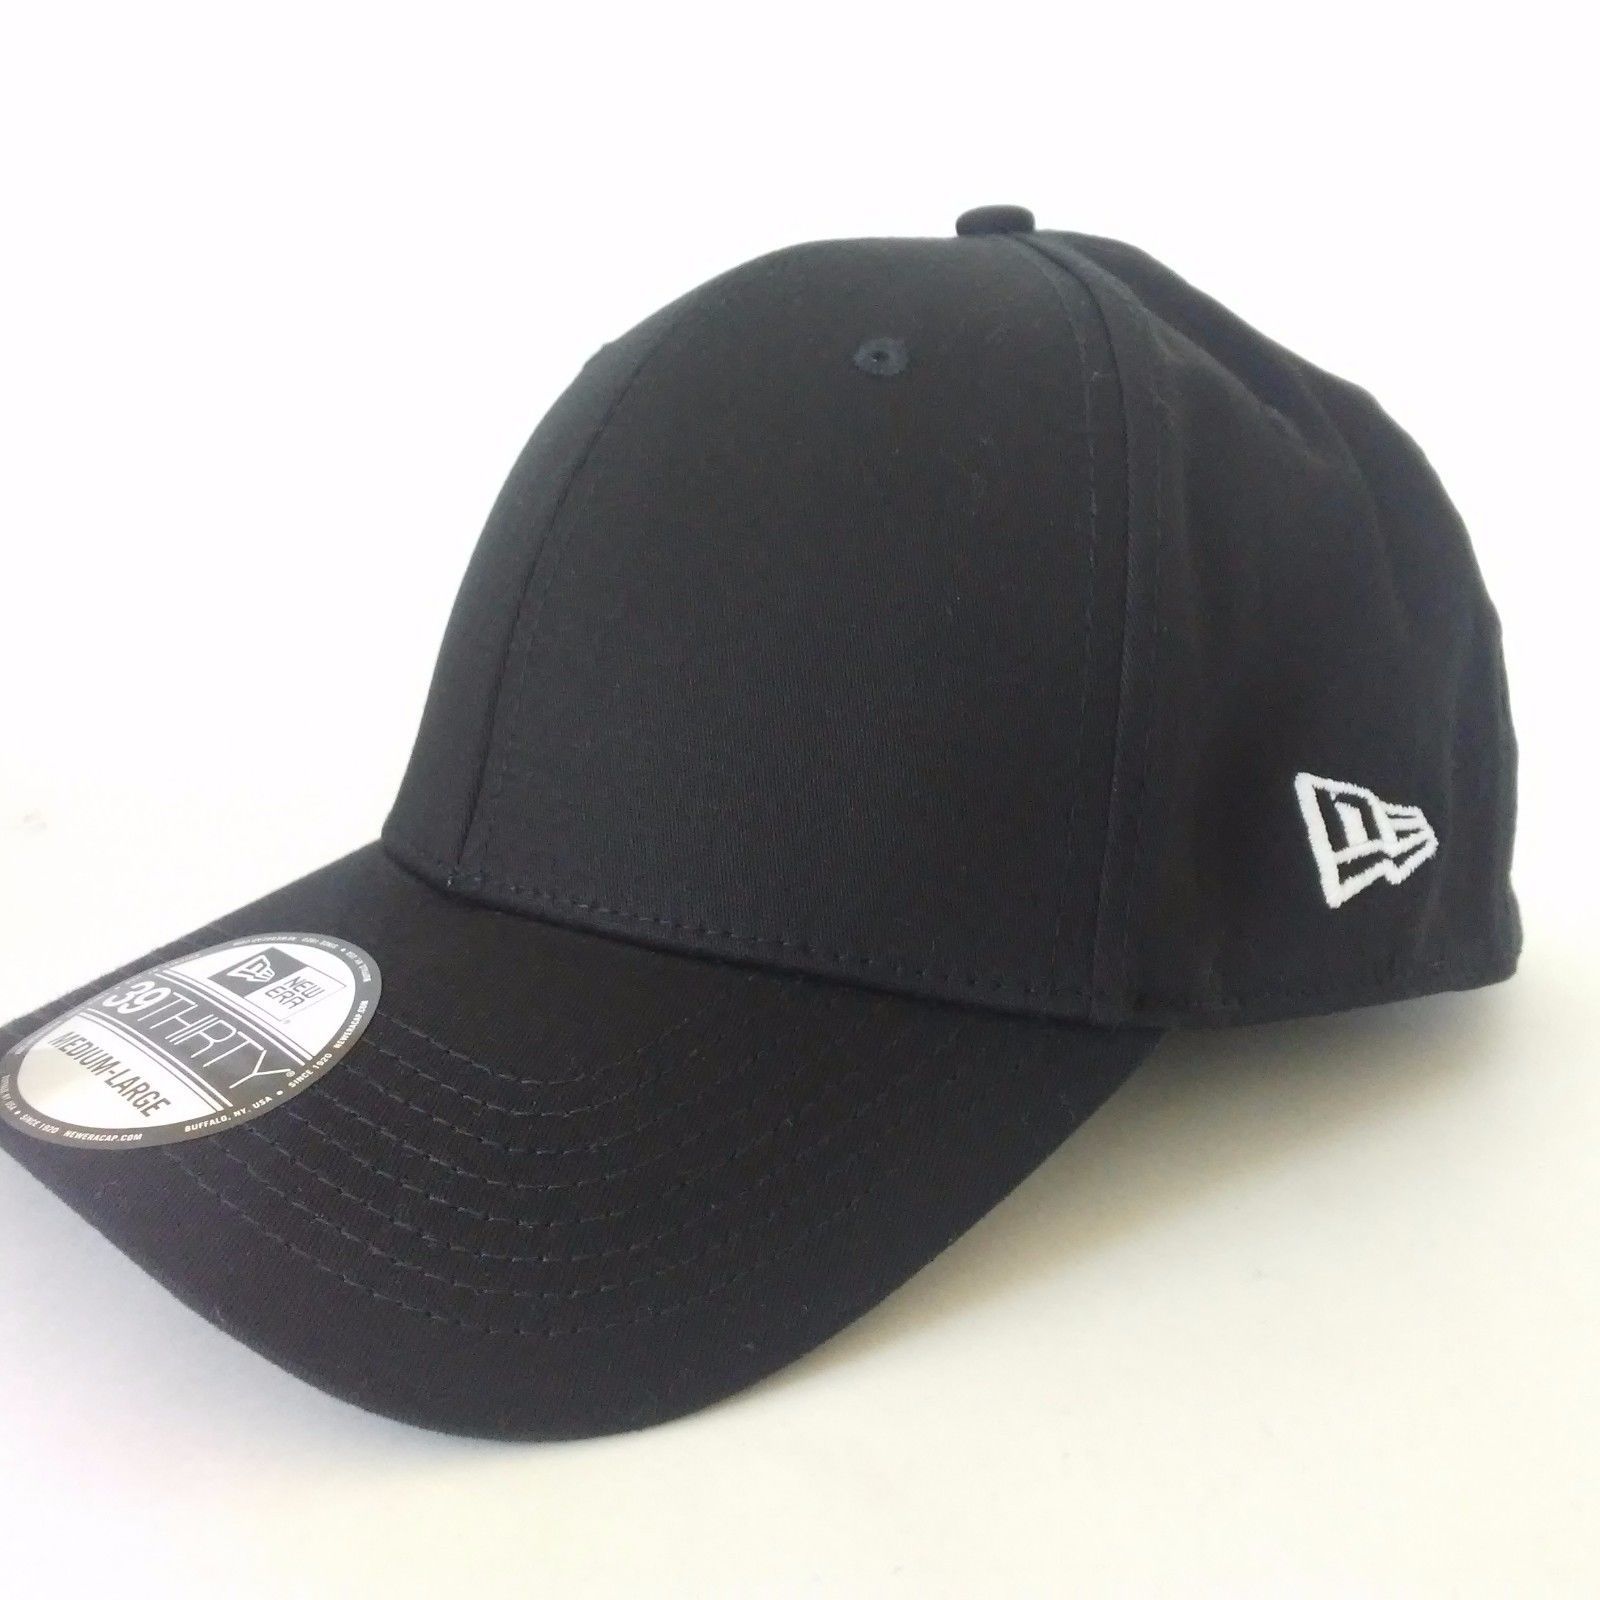 New Era 39Thirty Blank Stretch Cotton fitted Black Hat/Cap WITH LOGO - Hats